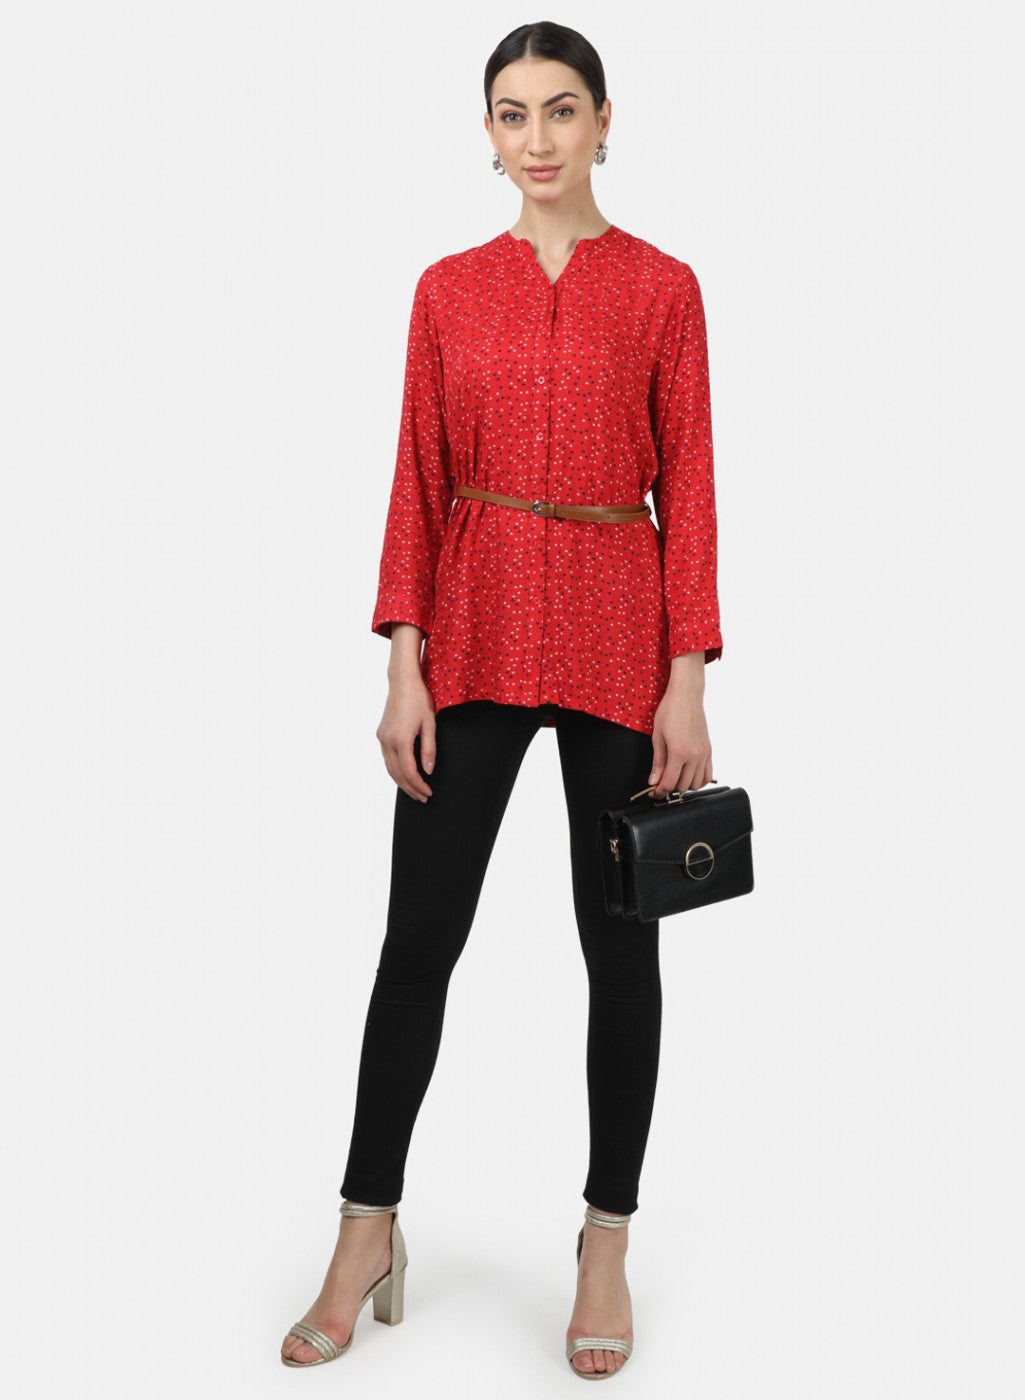 Womens Red Printed Top